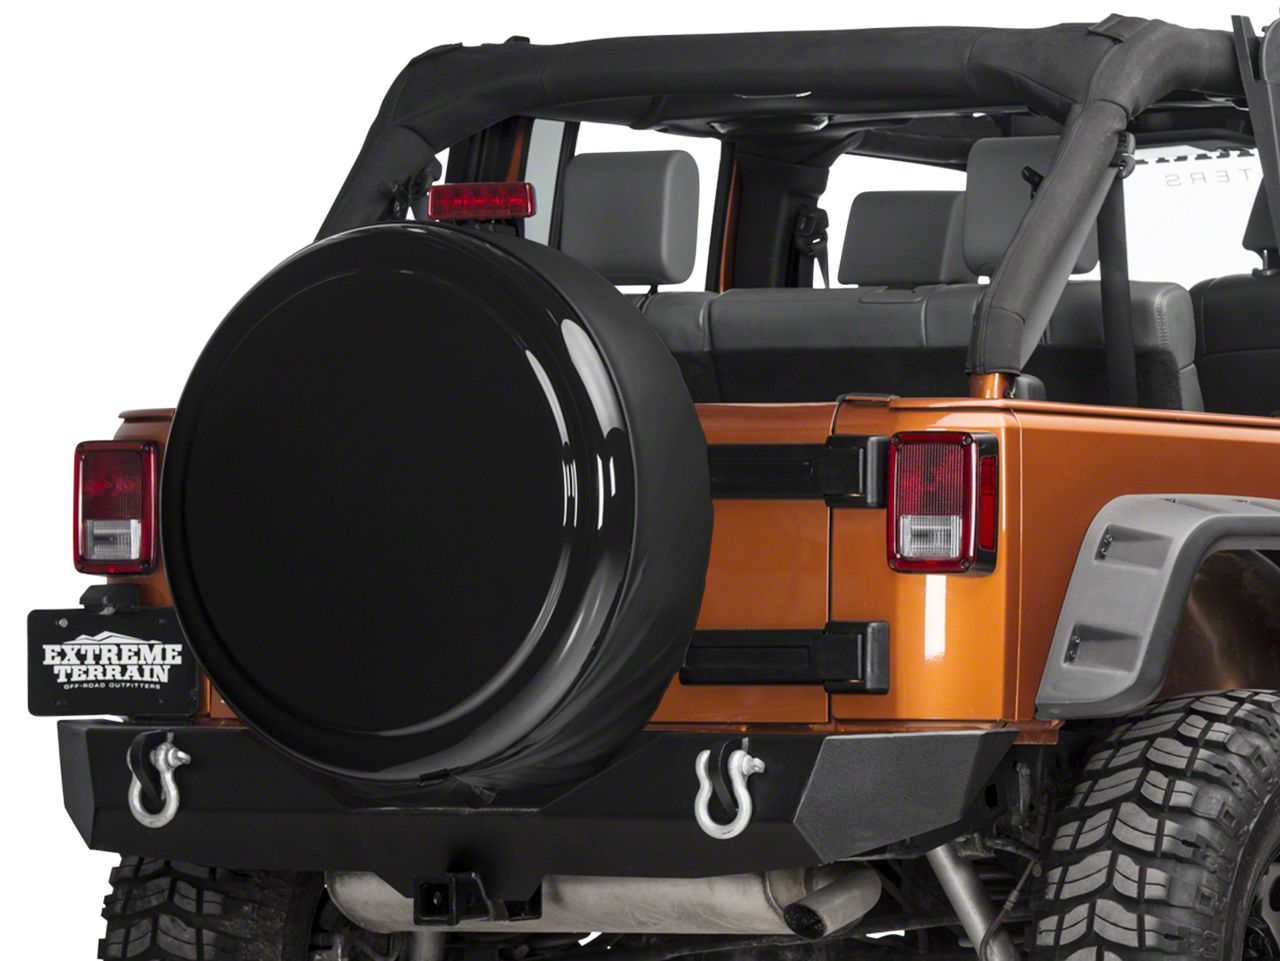 Jeep Tire Covers